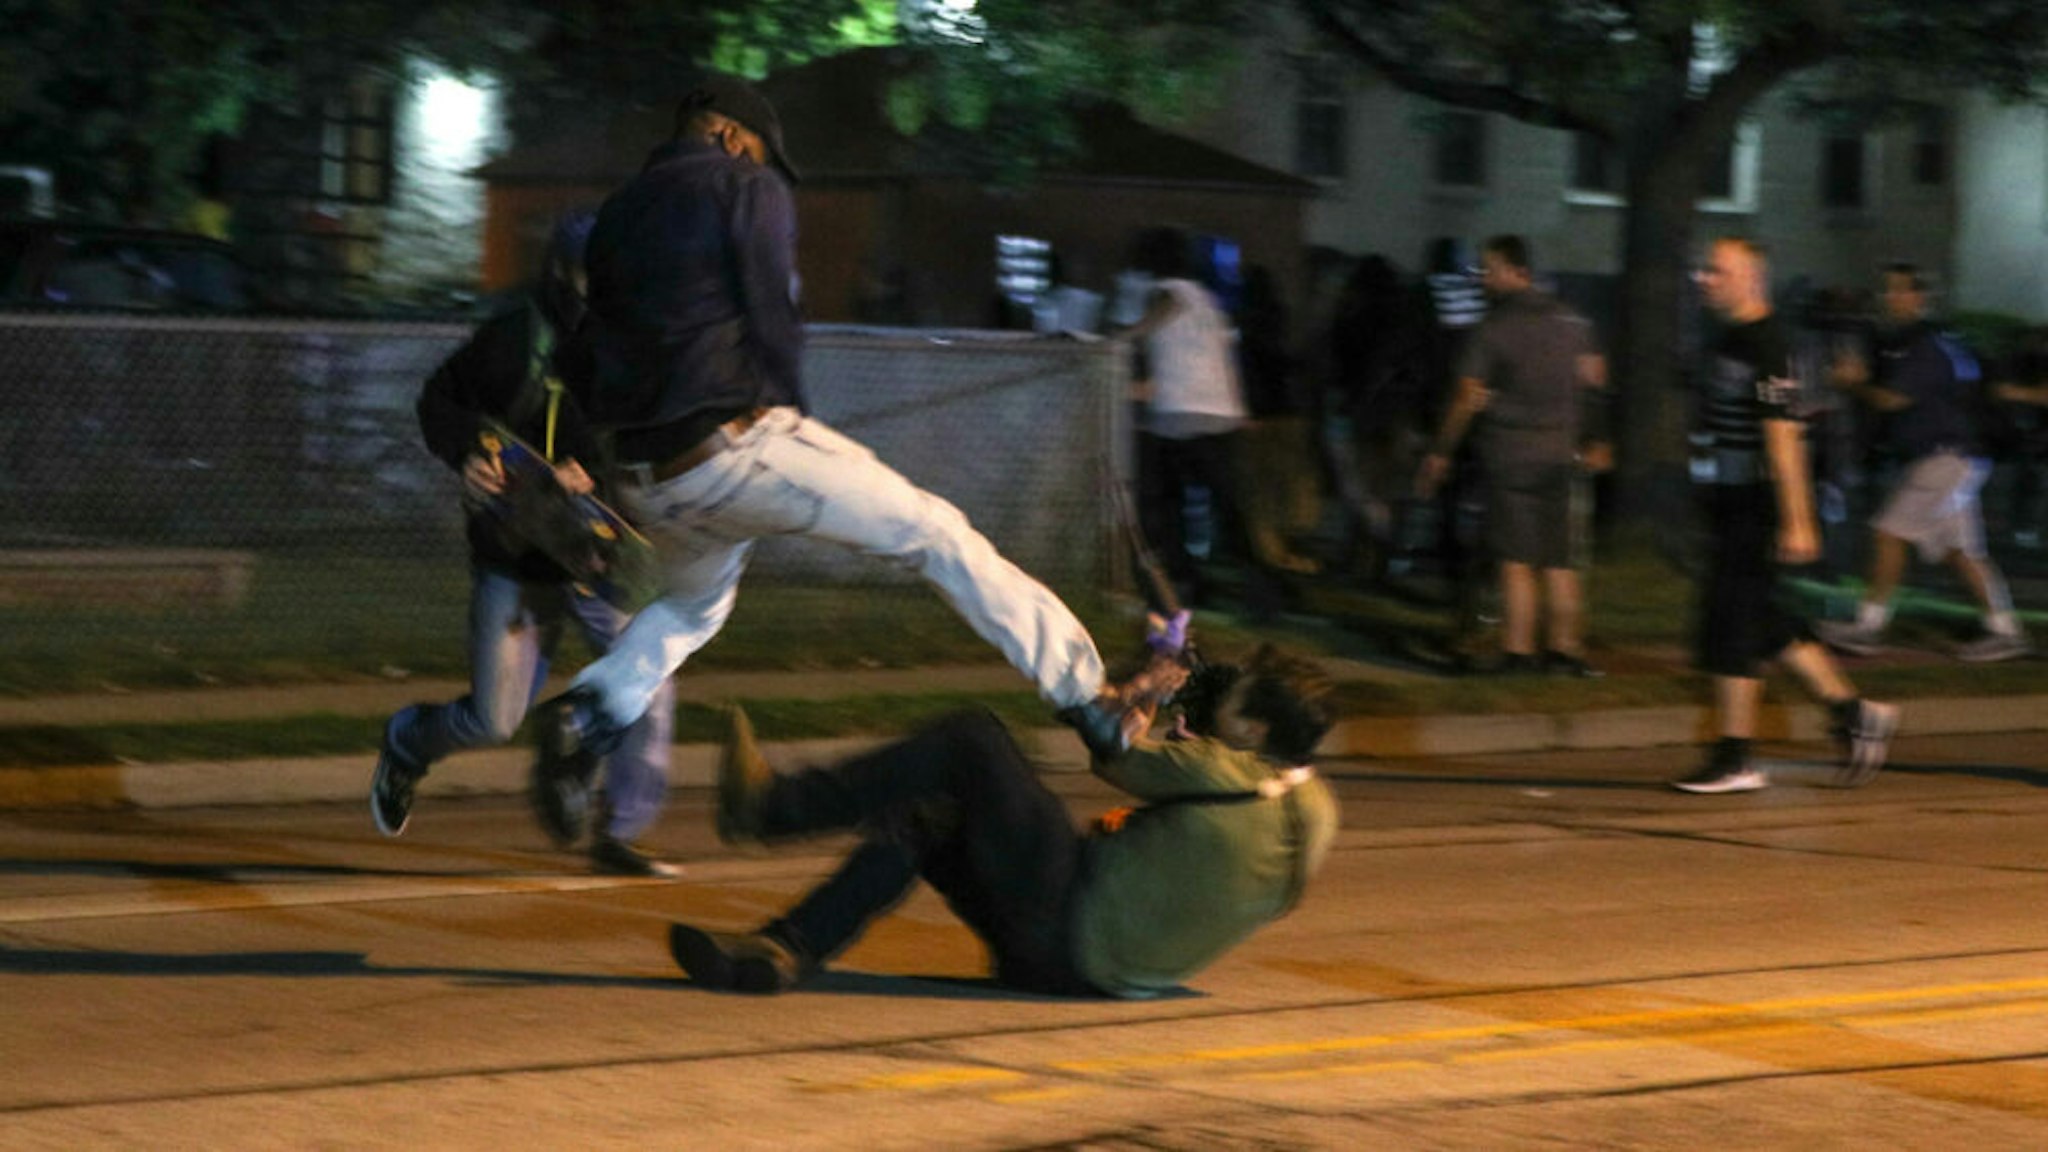 Clashes between protesters and armed civilians, who protect the streets of Kenosha against the arson, break out during the third day of protests over the shooting of a black man Jacob Blake by police officer in Wisconsin, United States on August 25, 2020.